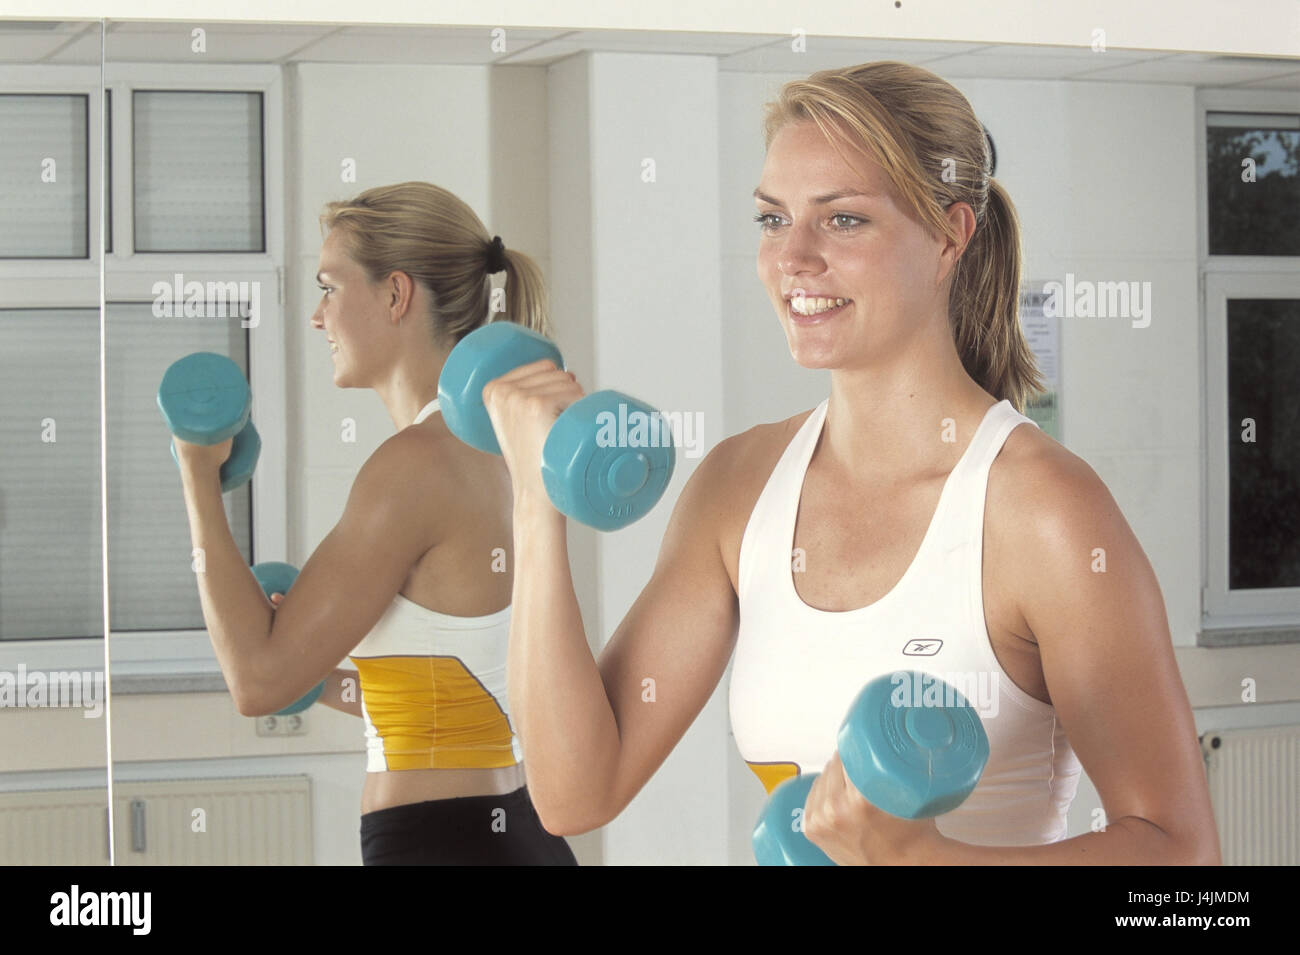 Fitness studio, woman, young, stand, tighten dumbbells, fitness practise, at the side, half portrait fitness room, sportswoman, blond, sports clothes, sportily, sport, hobby, leisure time, fitness, health, motion, practise, musculature, muscles, arms, biceps, arm musculature, to arm muscles, strain, muscle construction, training, train, dumbbell training, weights, short dumbbells, position, position, smile, inside, background, reflector, reflexion Stock Photo